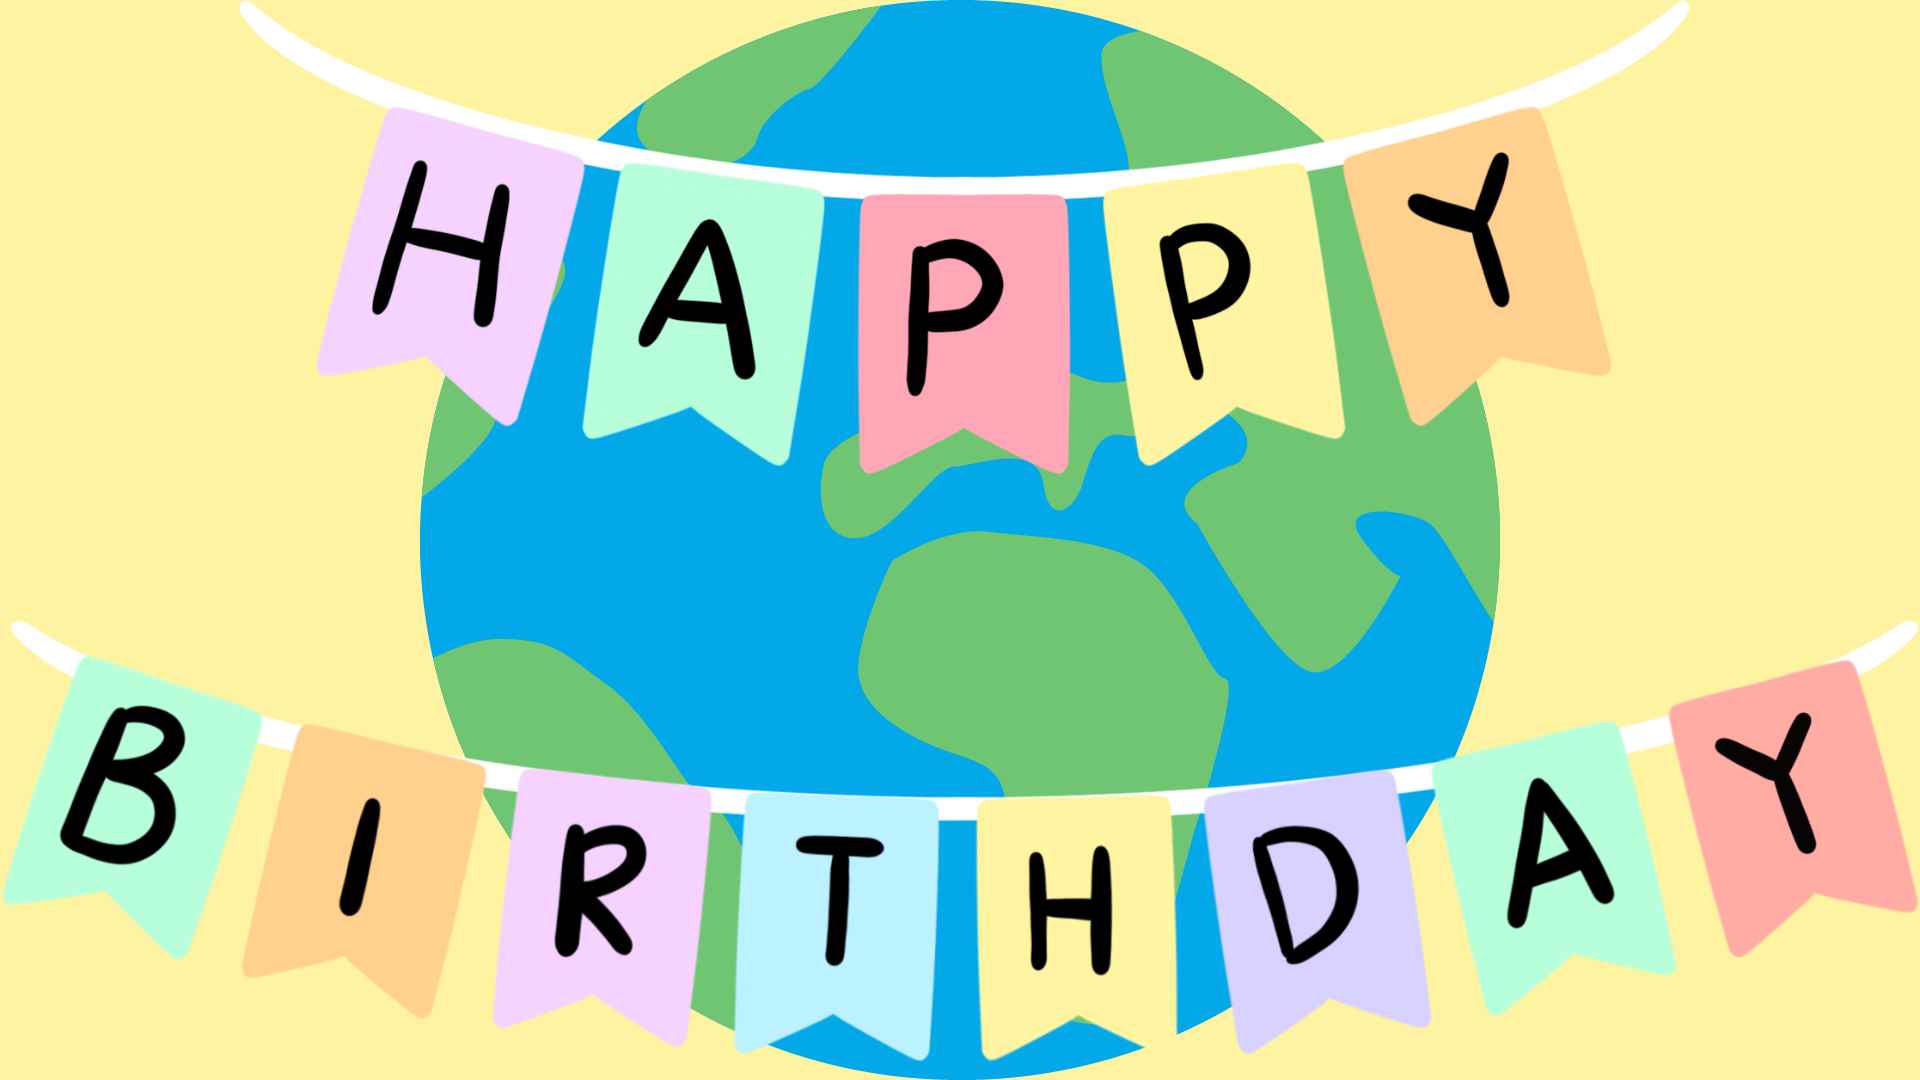 Banner saying 'happy birthday' with an image of the world behind it